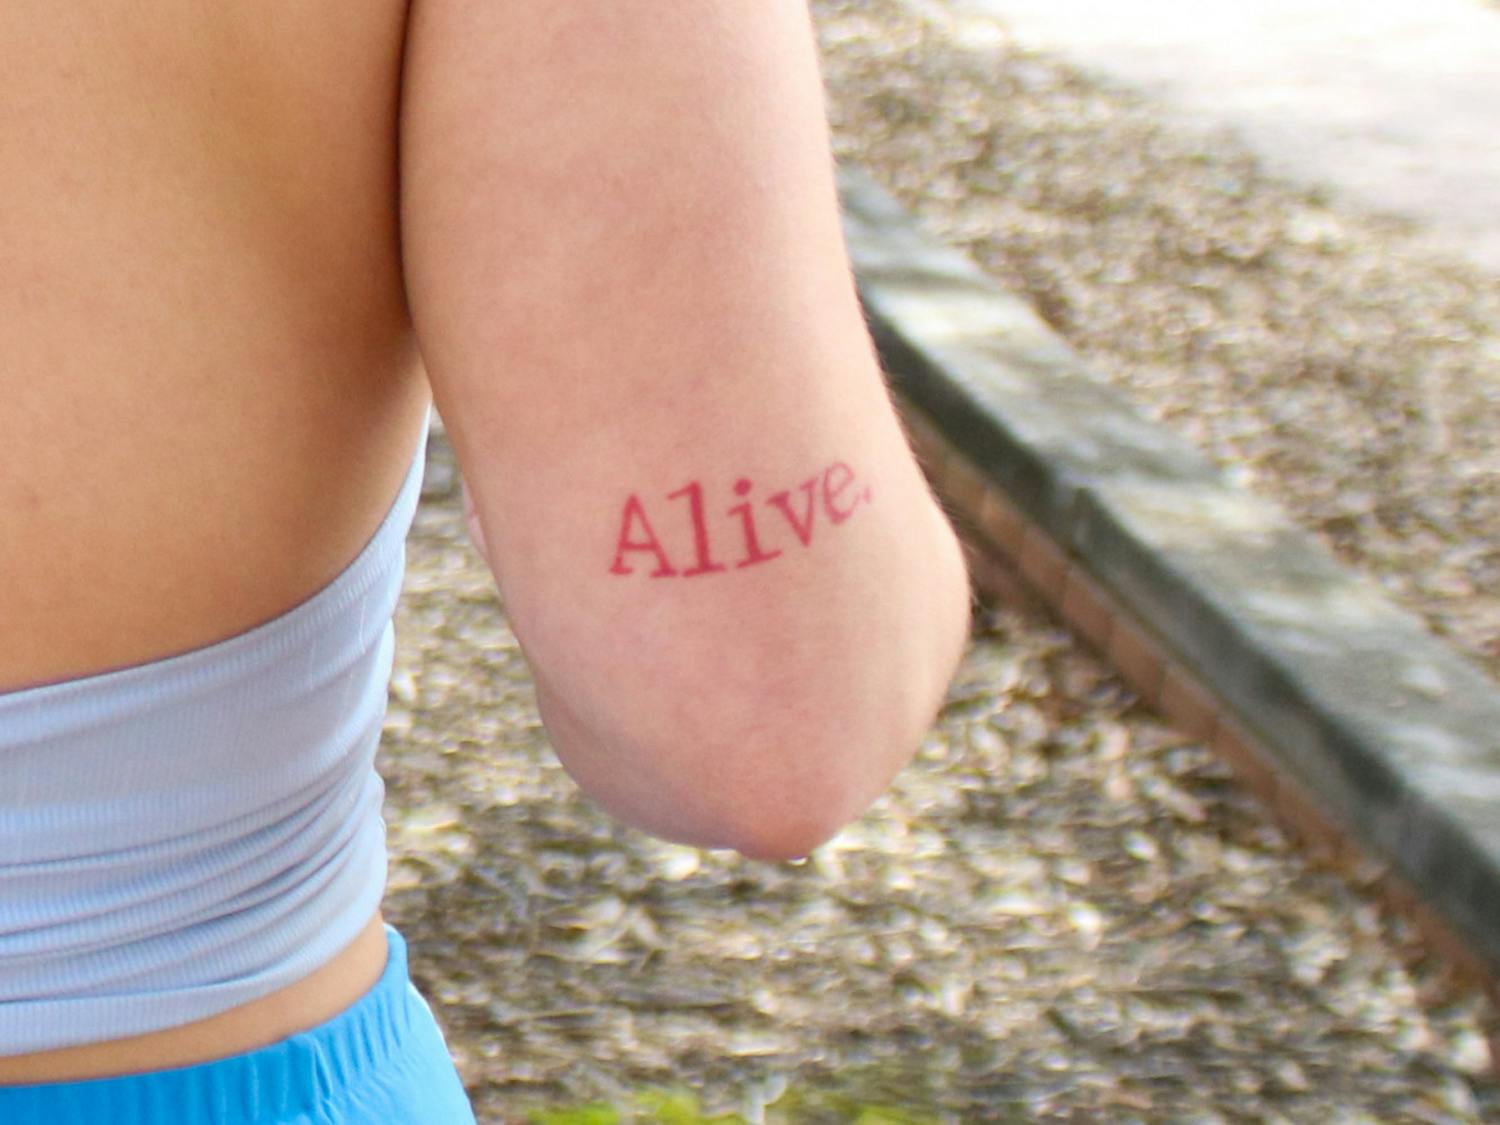 While many of Sandford’s tattoos carry a happy meaning, others embody the darker times in her life. “’Alive’ is my grief tattoo. It’s about two people very close to me who died within the span of three days,” Sandford said. “It happened so close to each other, and it was really just a big slap in the face, you are alive once. Be appreciative of it. Be grateful that you are alive.” Sandford said this tattoo reminds her of what she went through and motivates her to continue to carry on living life to its fullest potential.